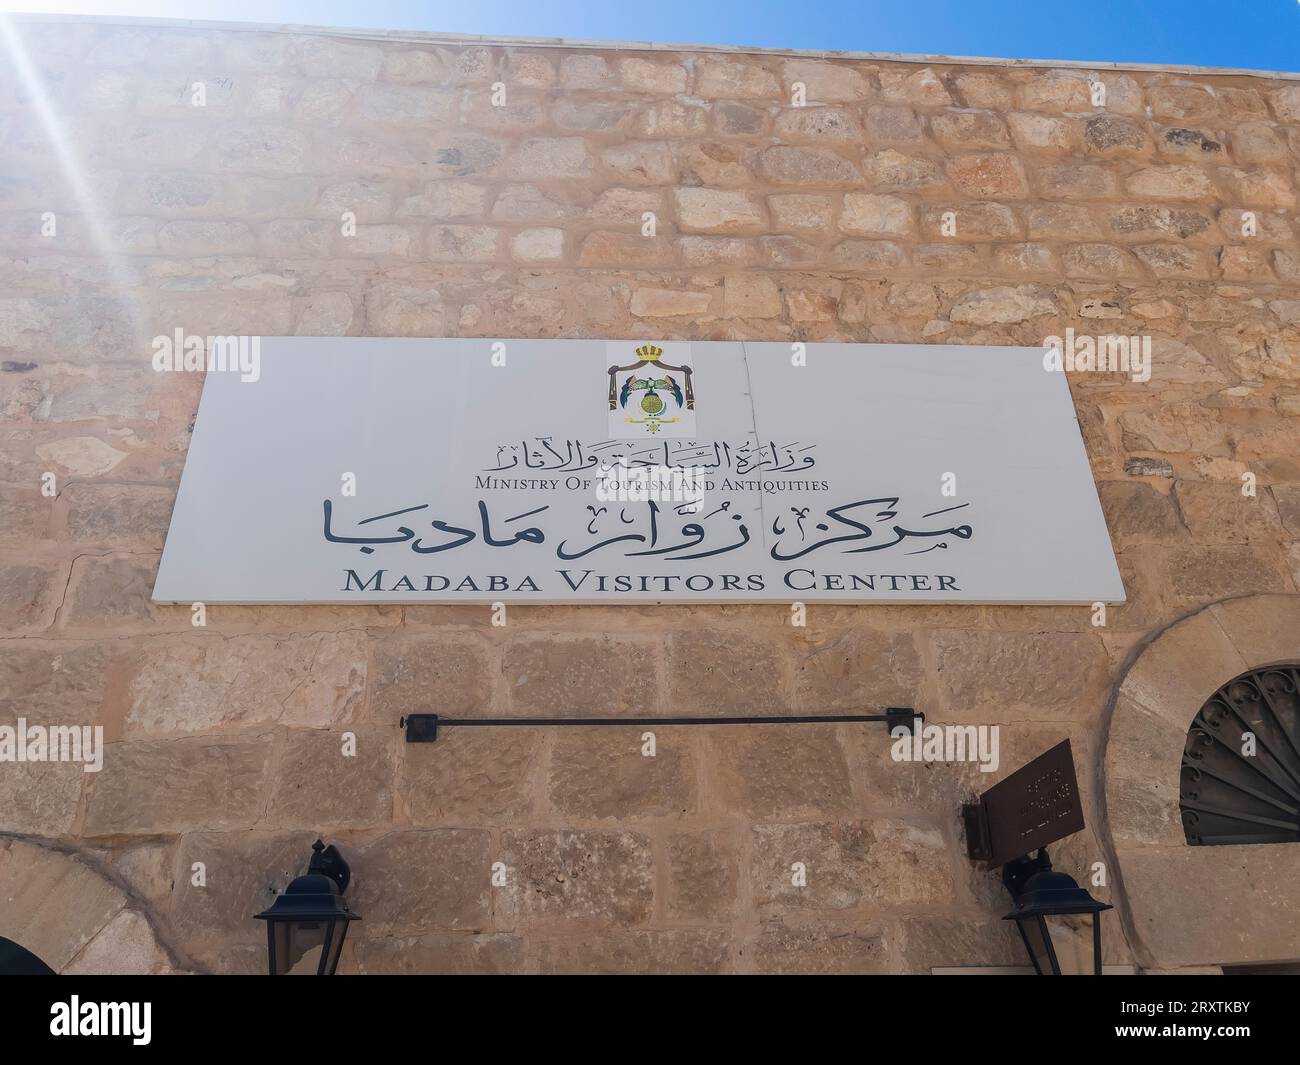 The Madaba Visitors Center, located in the middle of Madaba, Jordan, Middle East Stock Photo